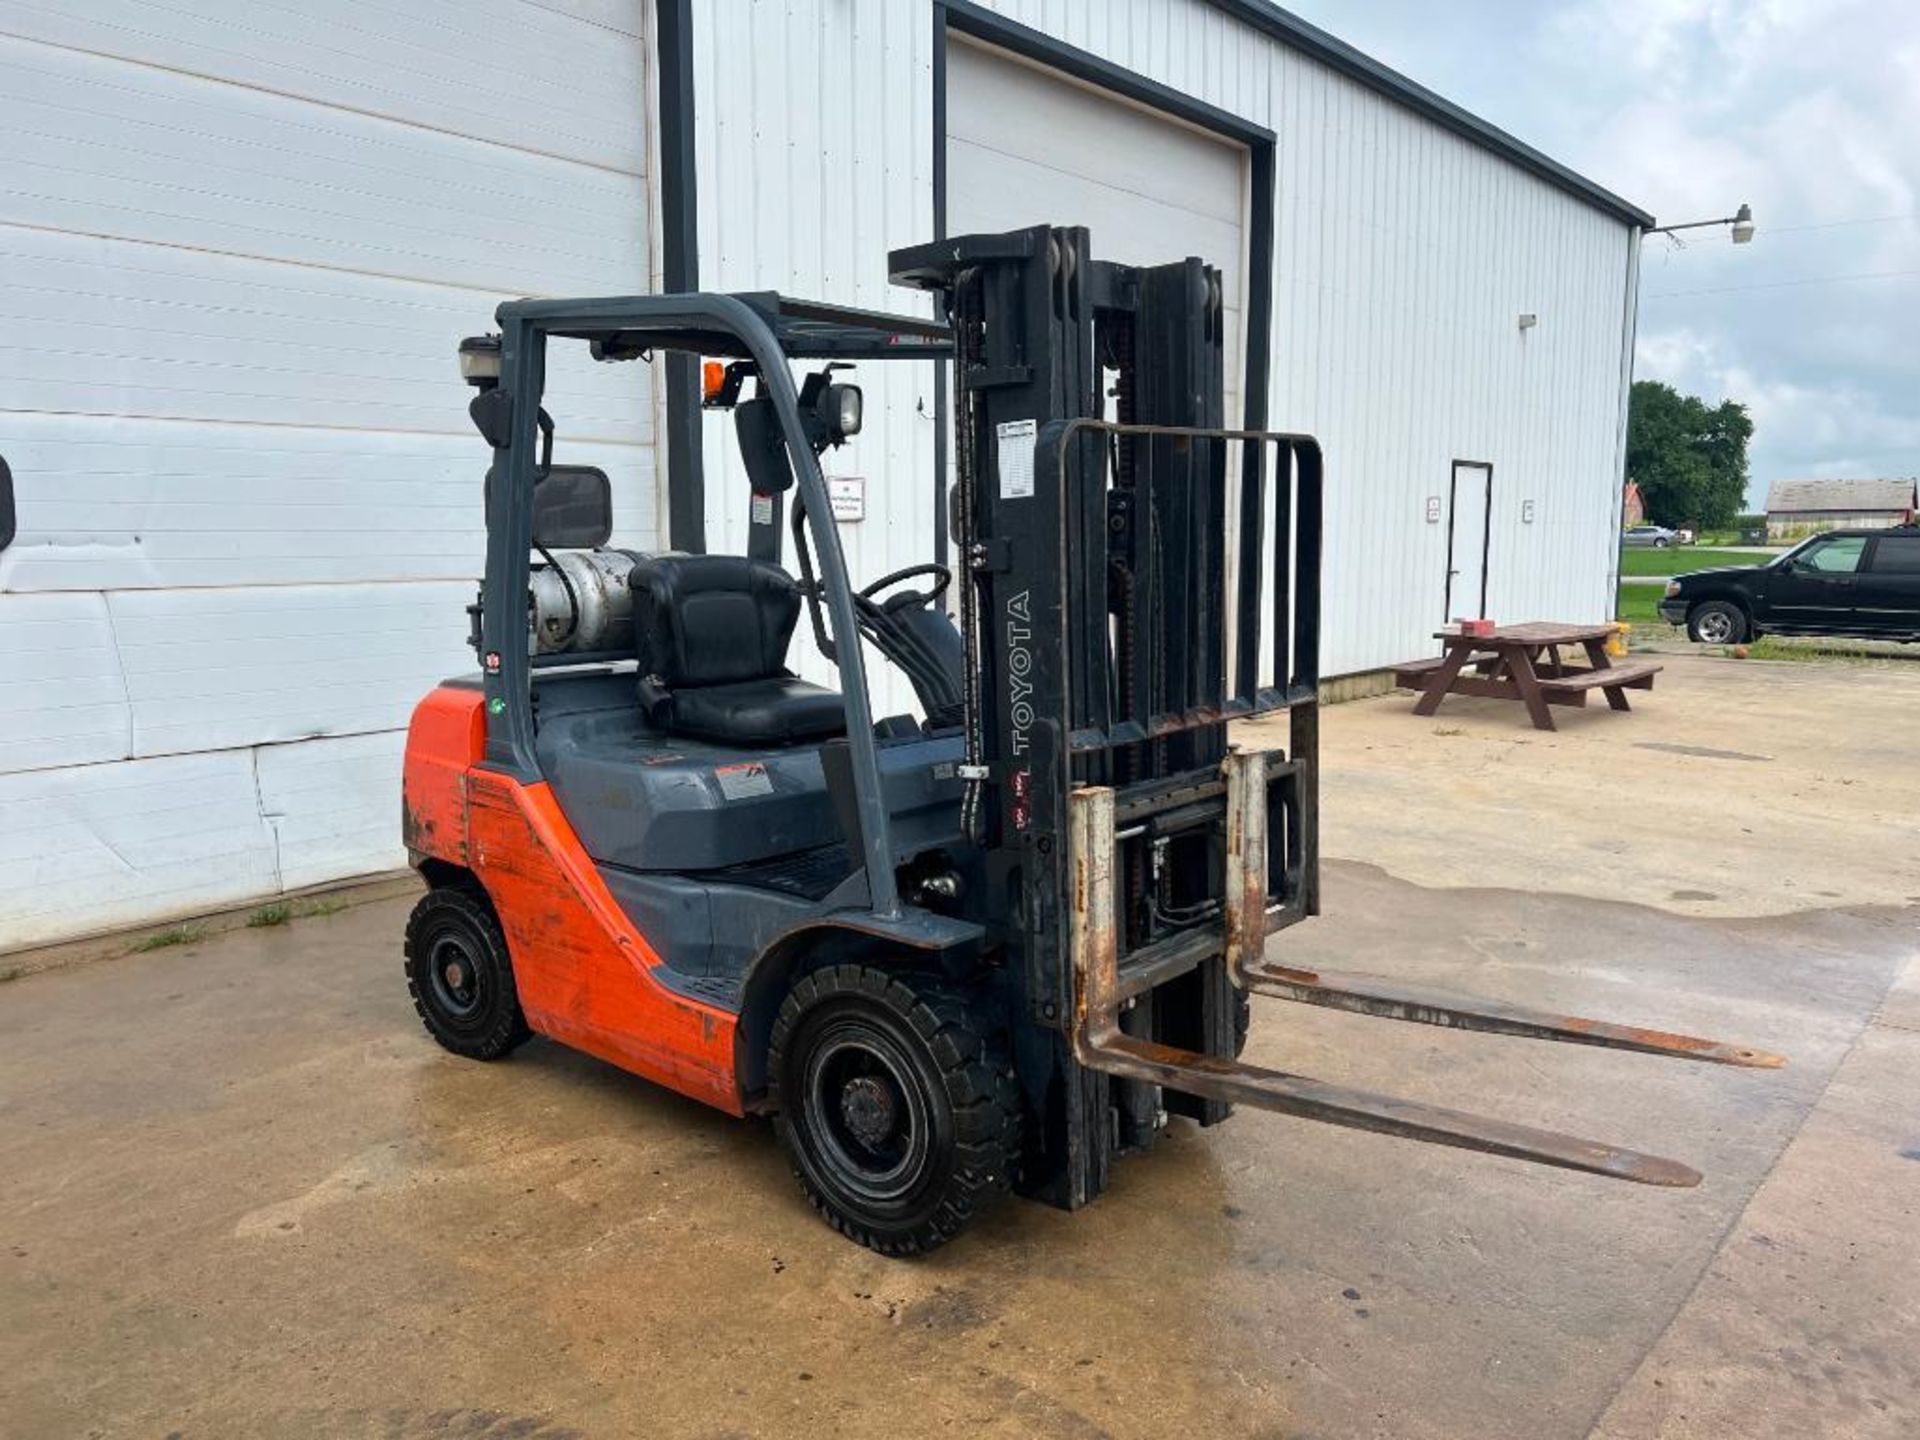 Toyota Forklift Truck, Model 8FGU25, Hours 5,264, LP. Located in Altamont, IL